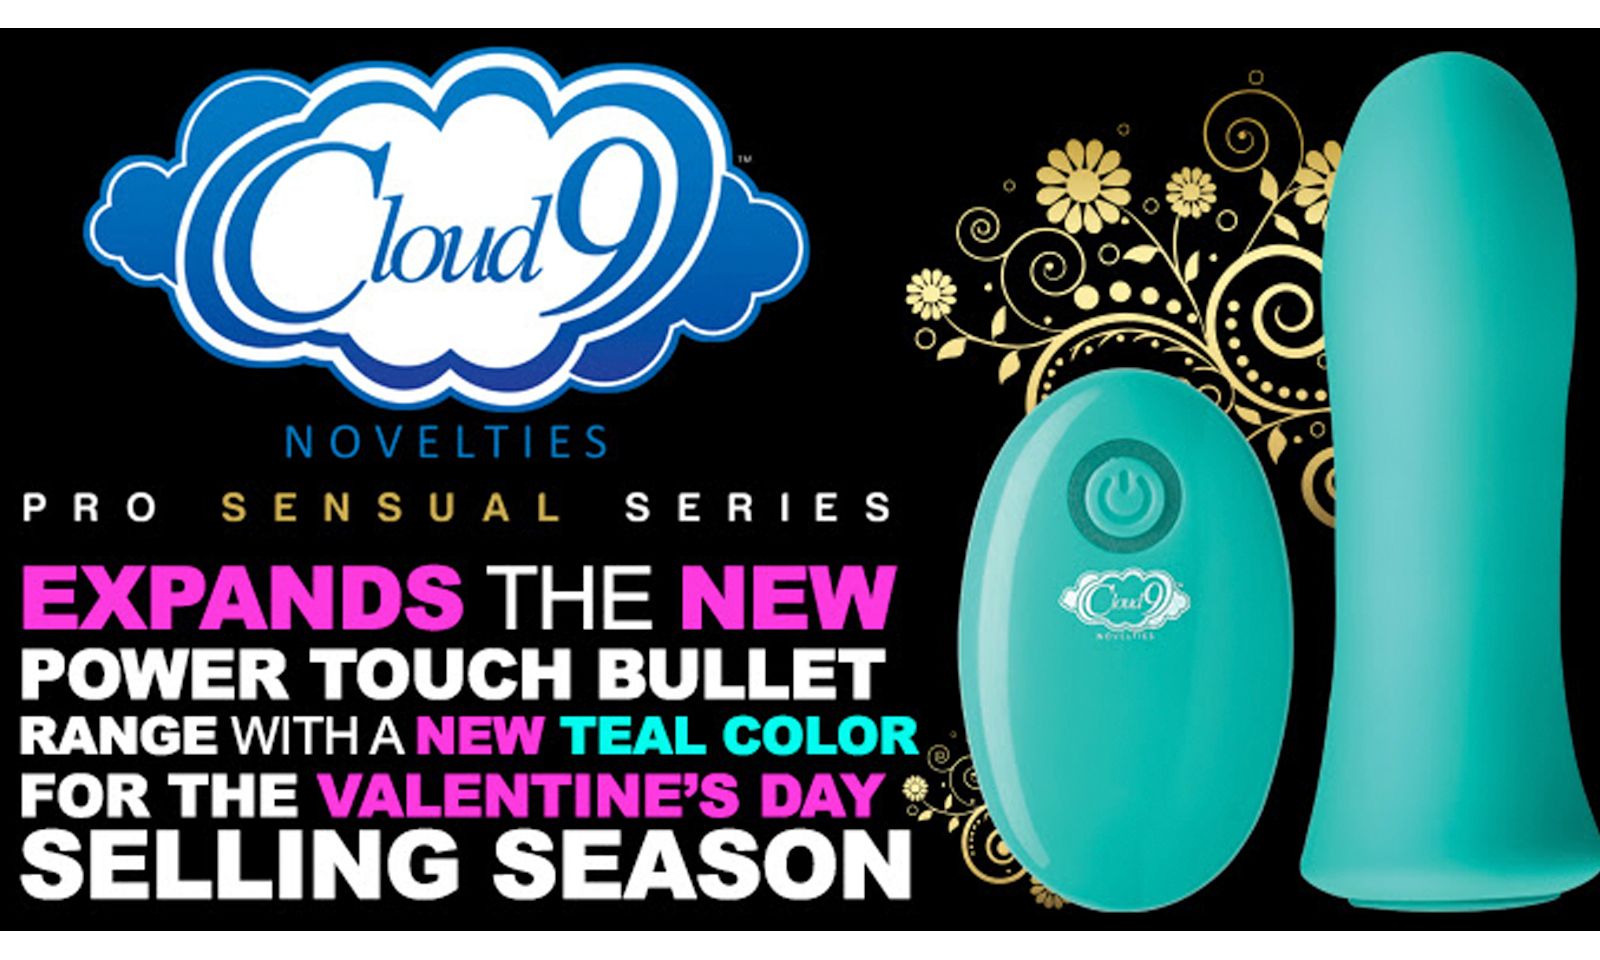 Cloud 9 Novelties Adds Teal Color to Power Touch Bullet Range